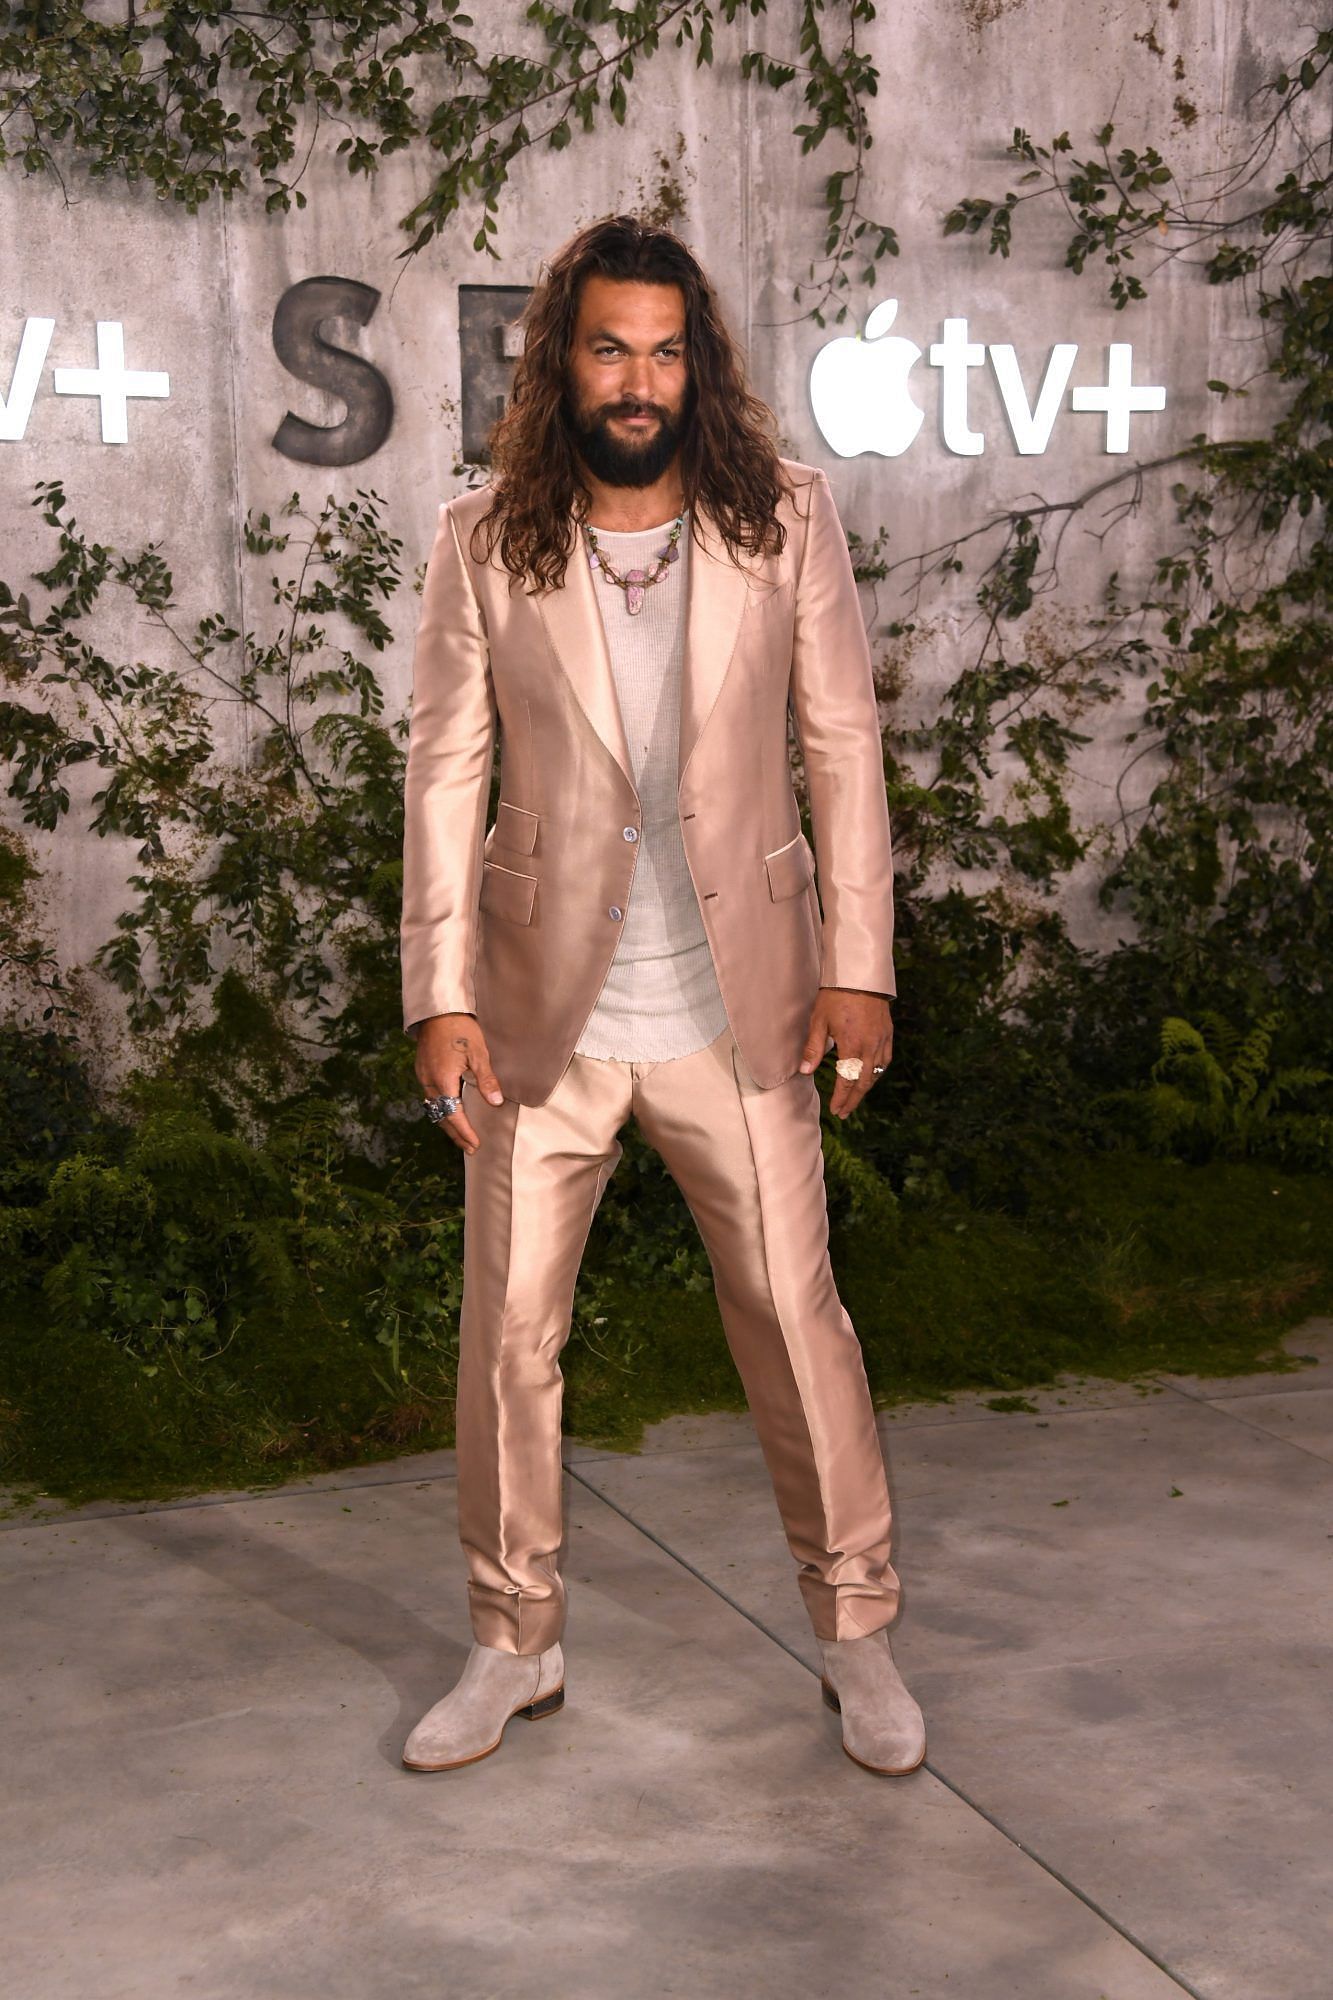 Jason Momoa at the premiere of &#039;See&#039;. (Image via Getty Images)